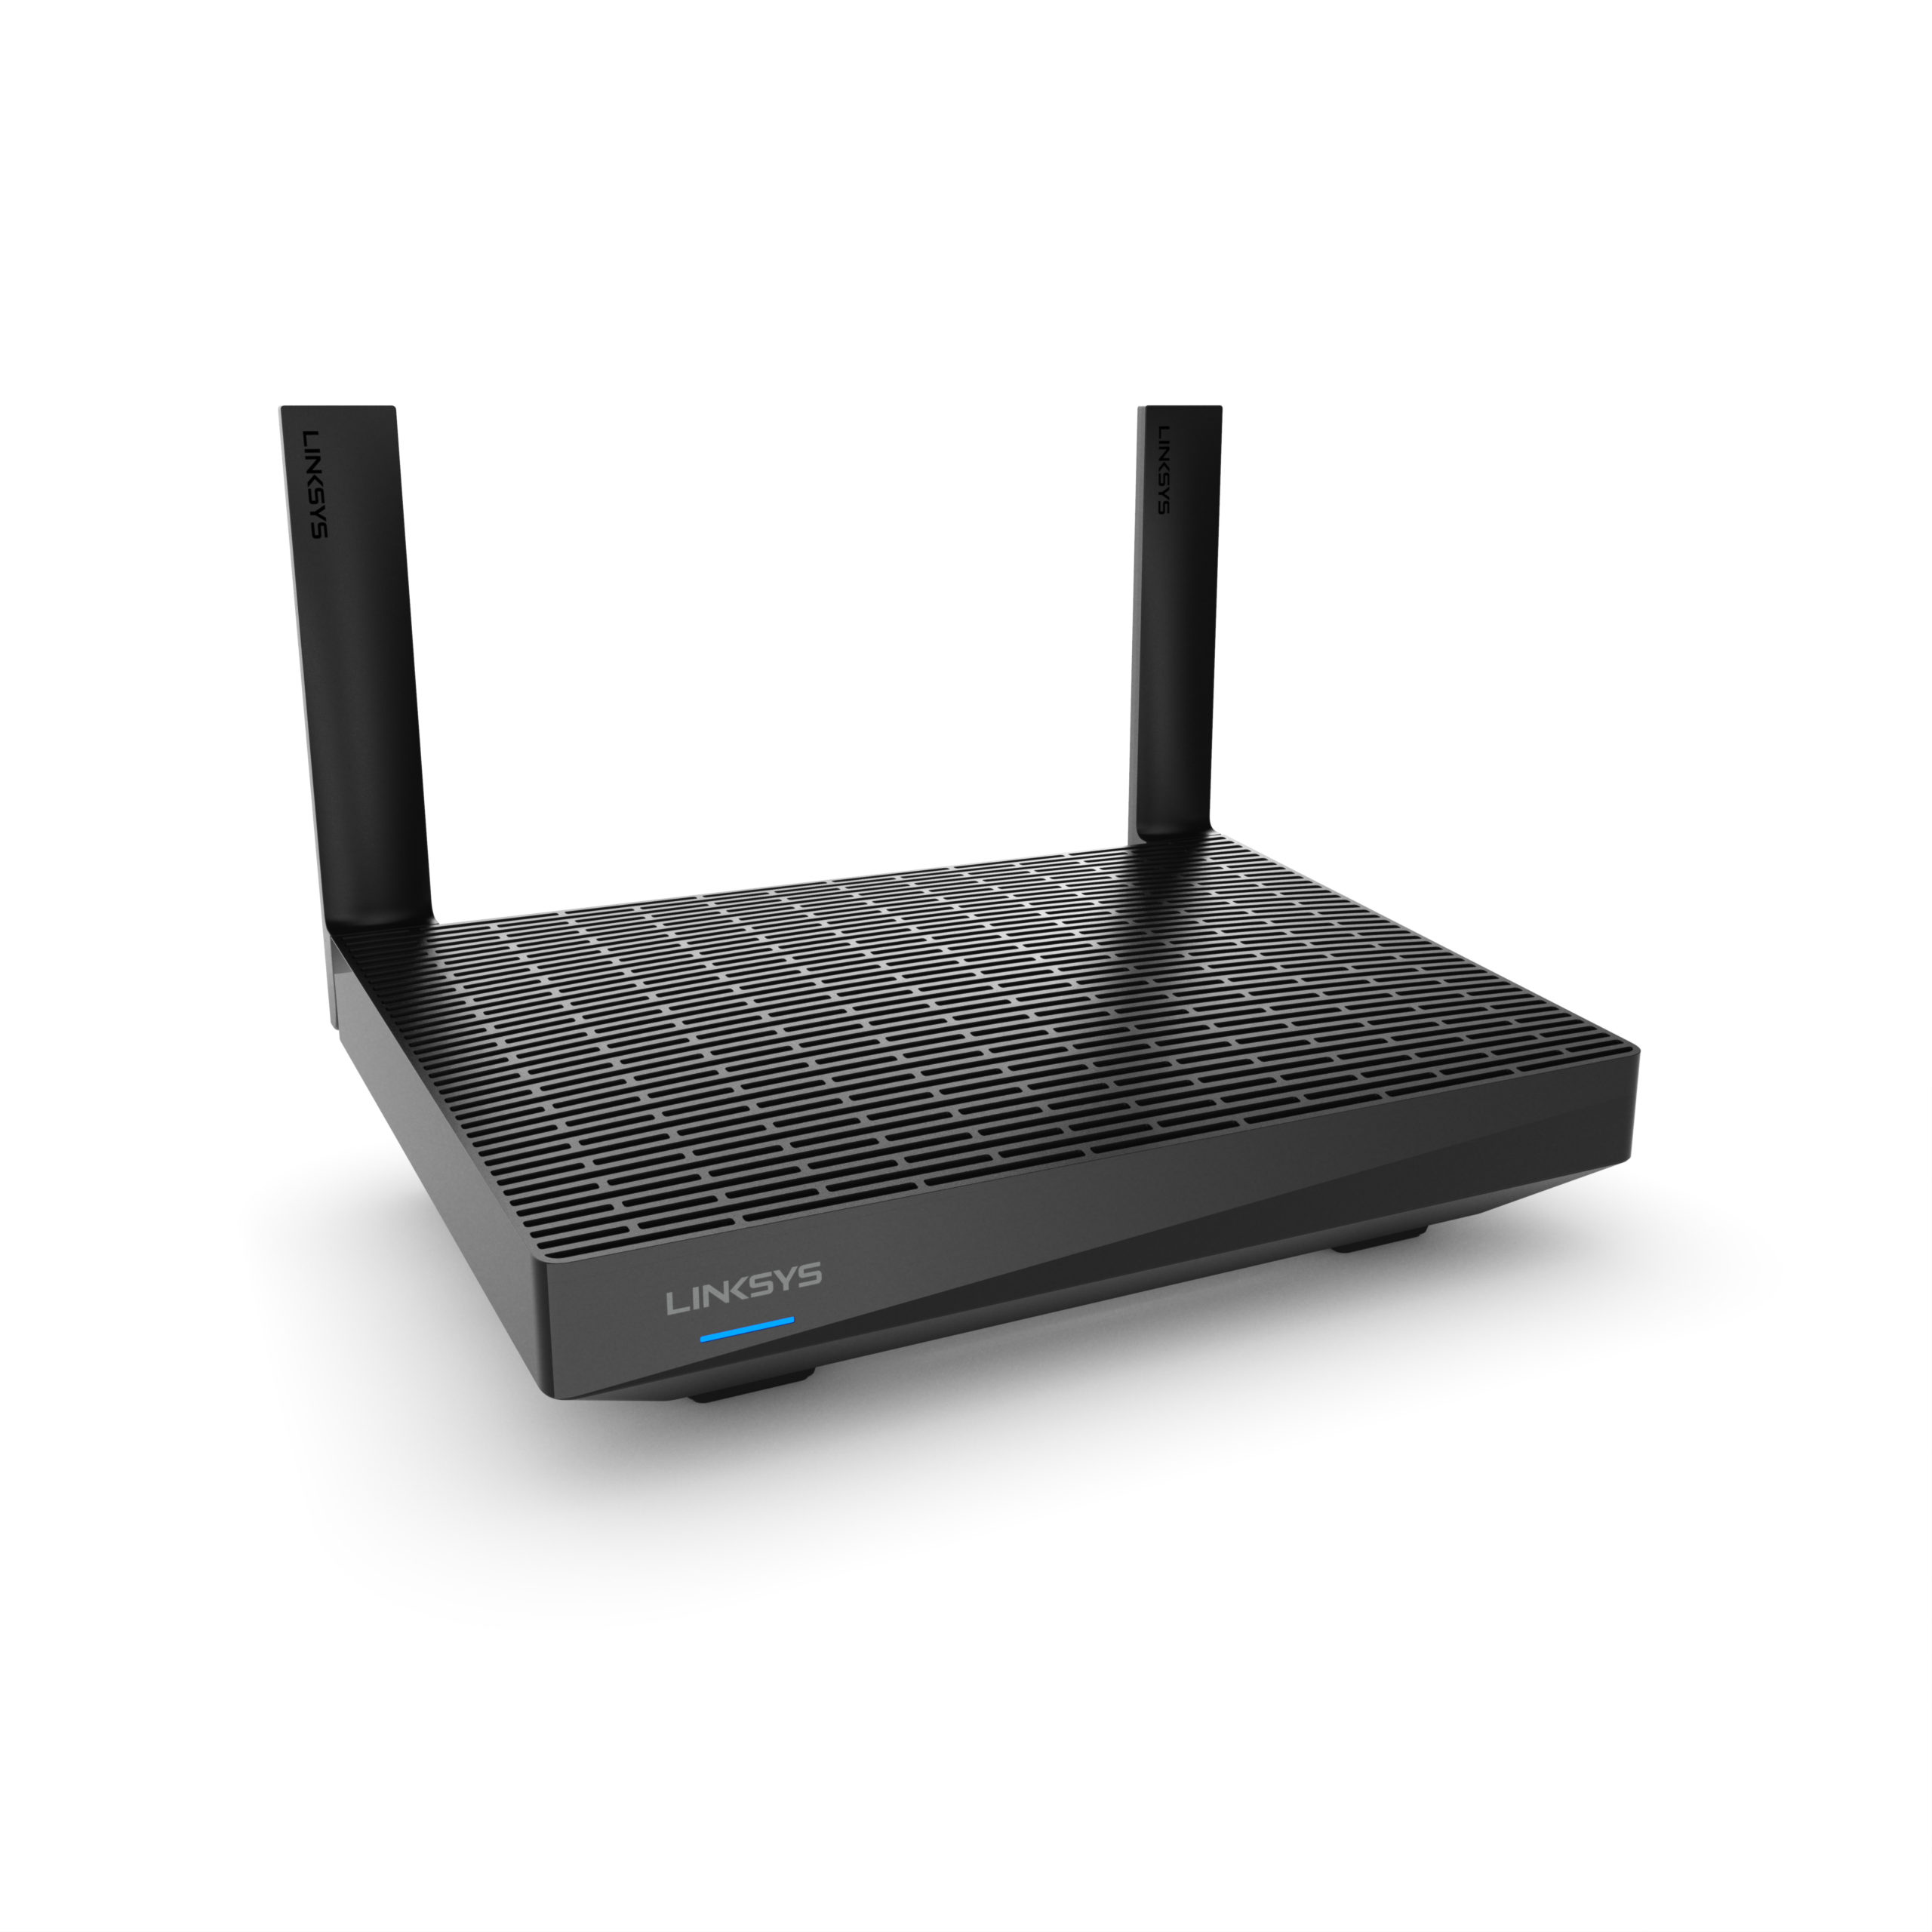 Linksys and Deutsche Telekom bring Wi-Fi 6 home networks to the mainstream